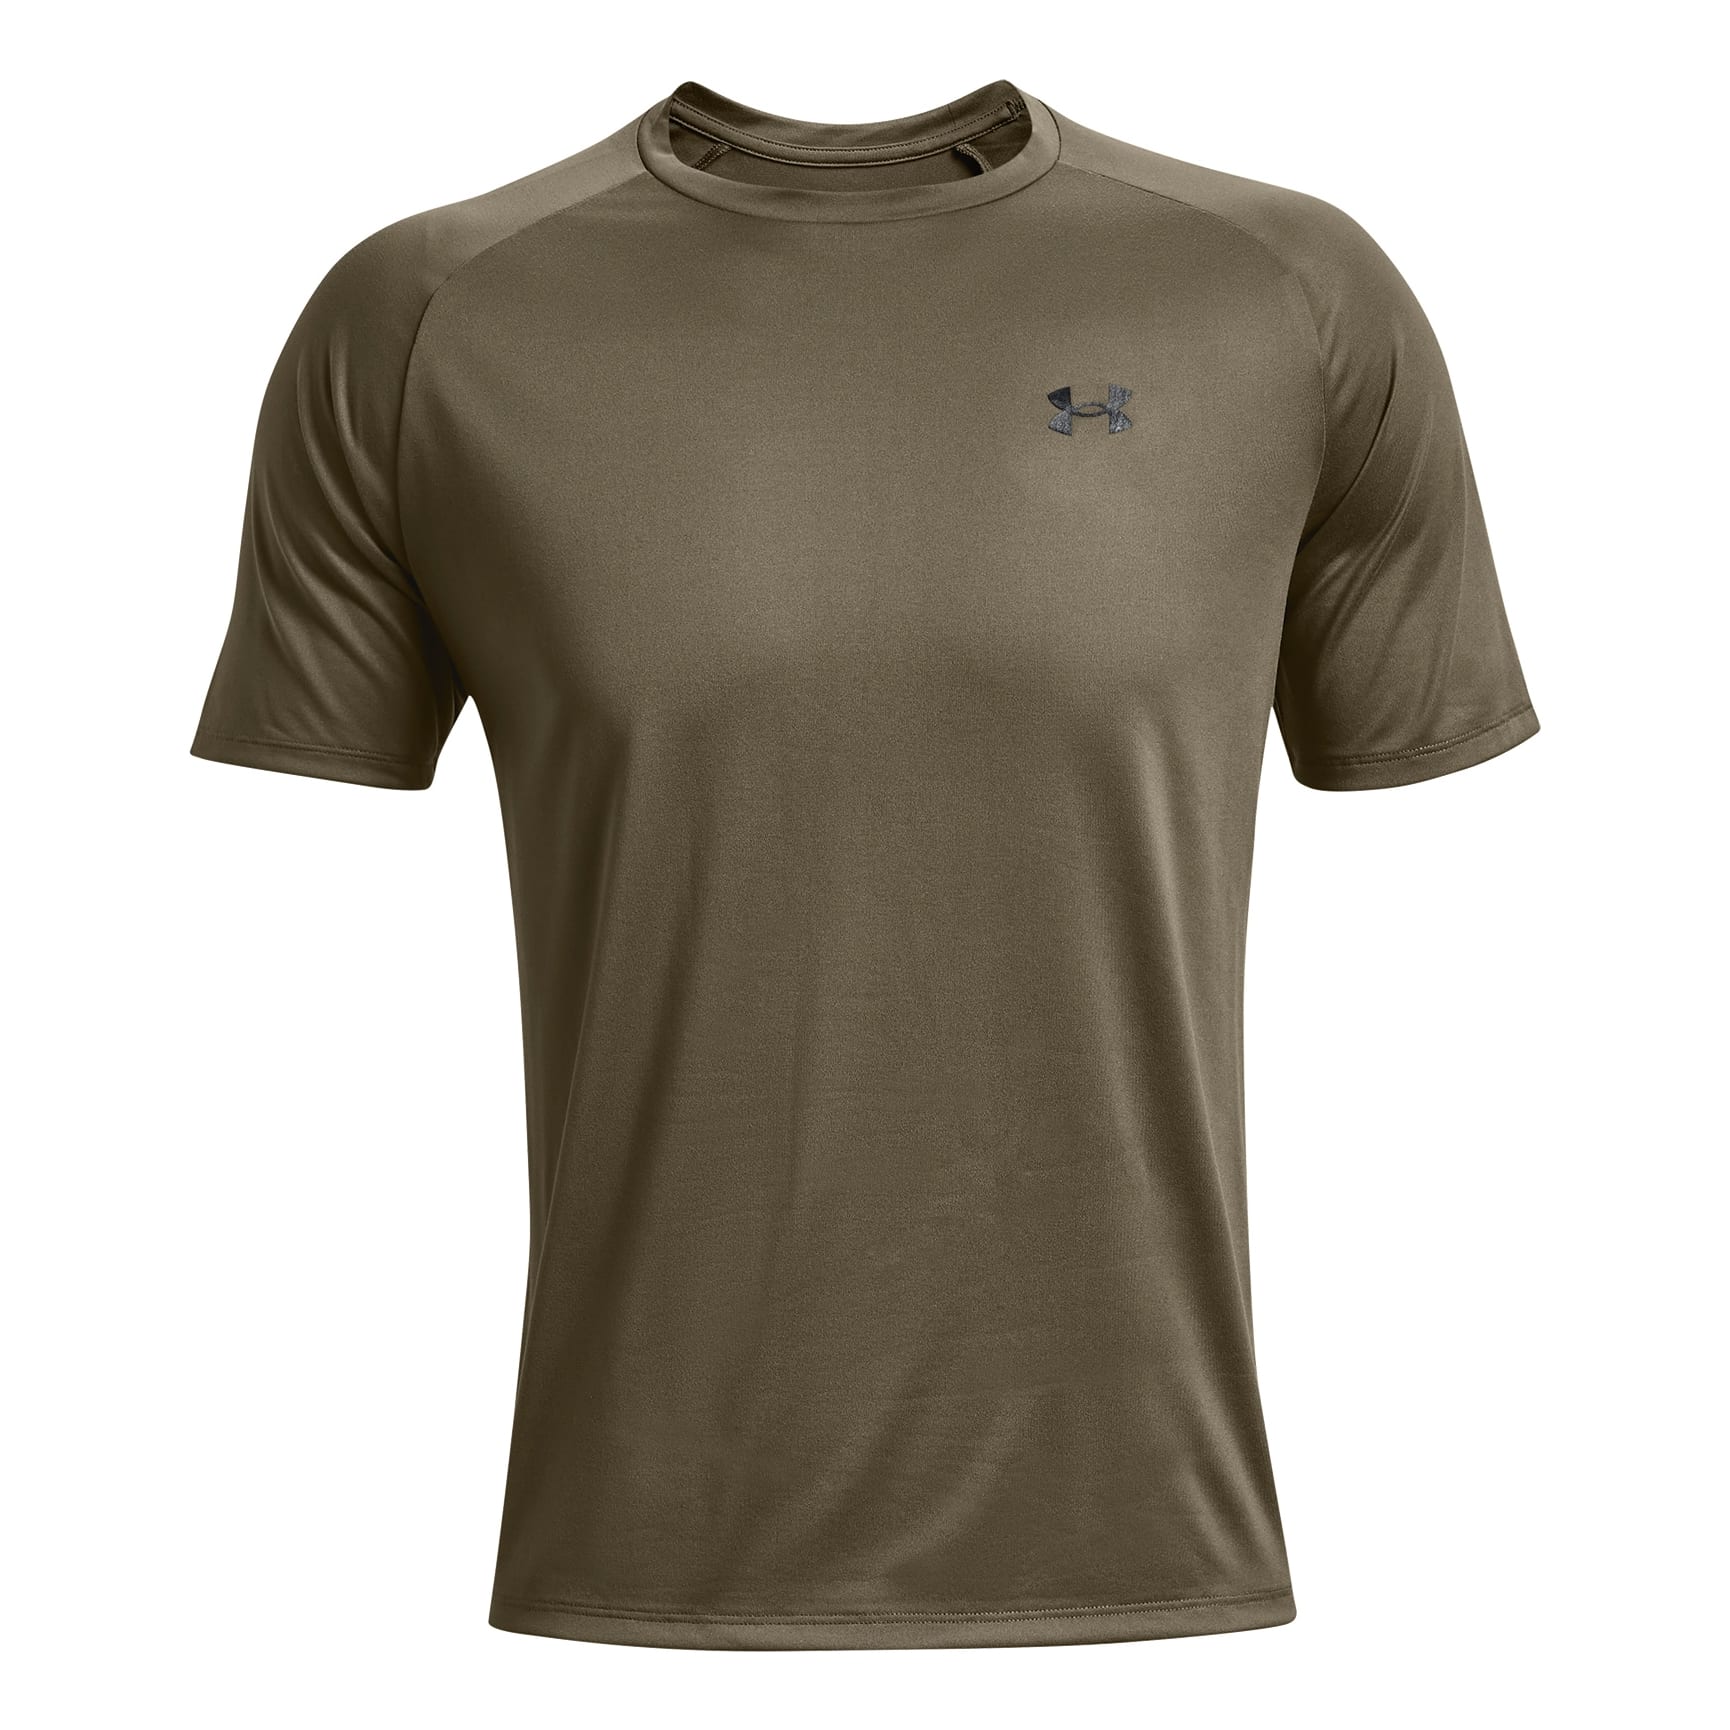 Gym Clothes with Anti-Odour Technology Under Armour Mens Ua Tech 2.0 Short Sleeve Tee Light and Breathable Sports T-Shirt 